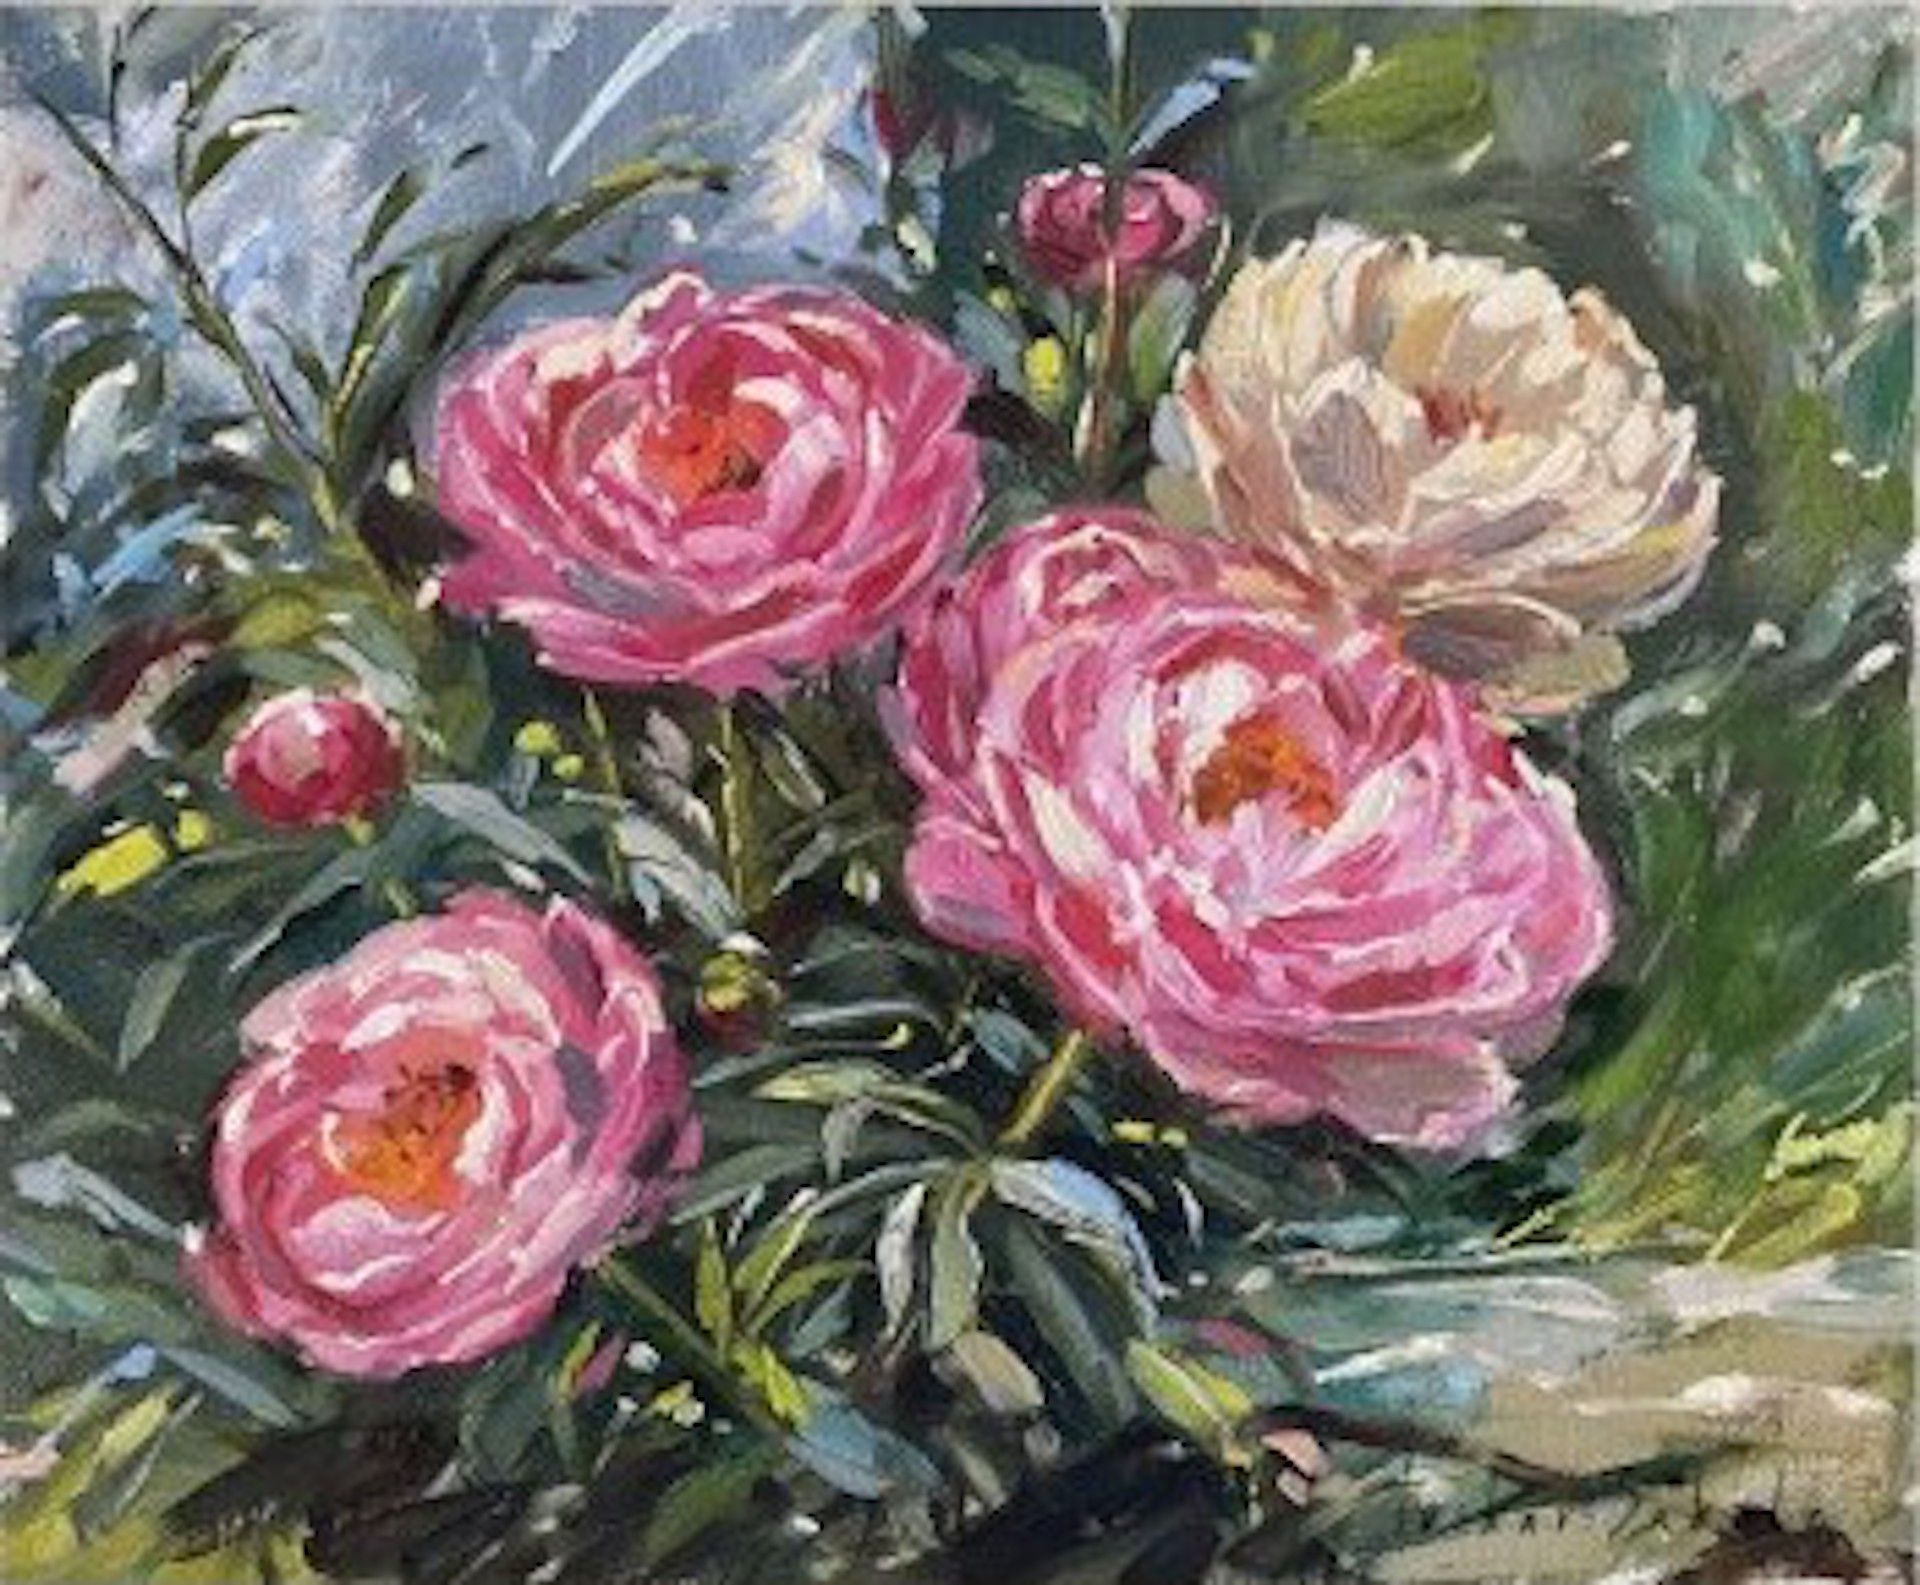 Pink and White Peonies by Tushar Sabale